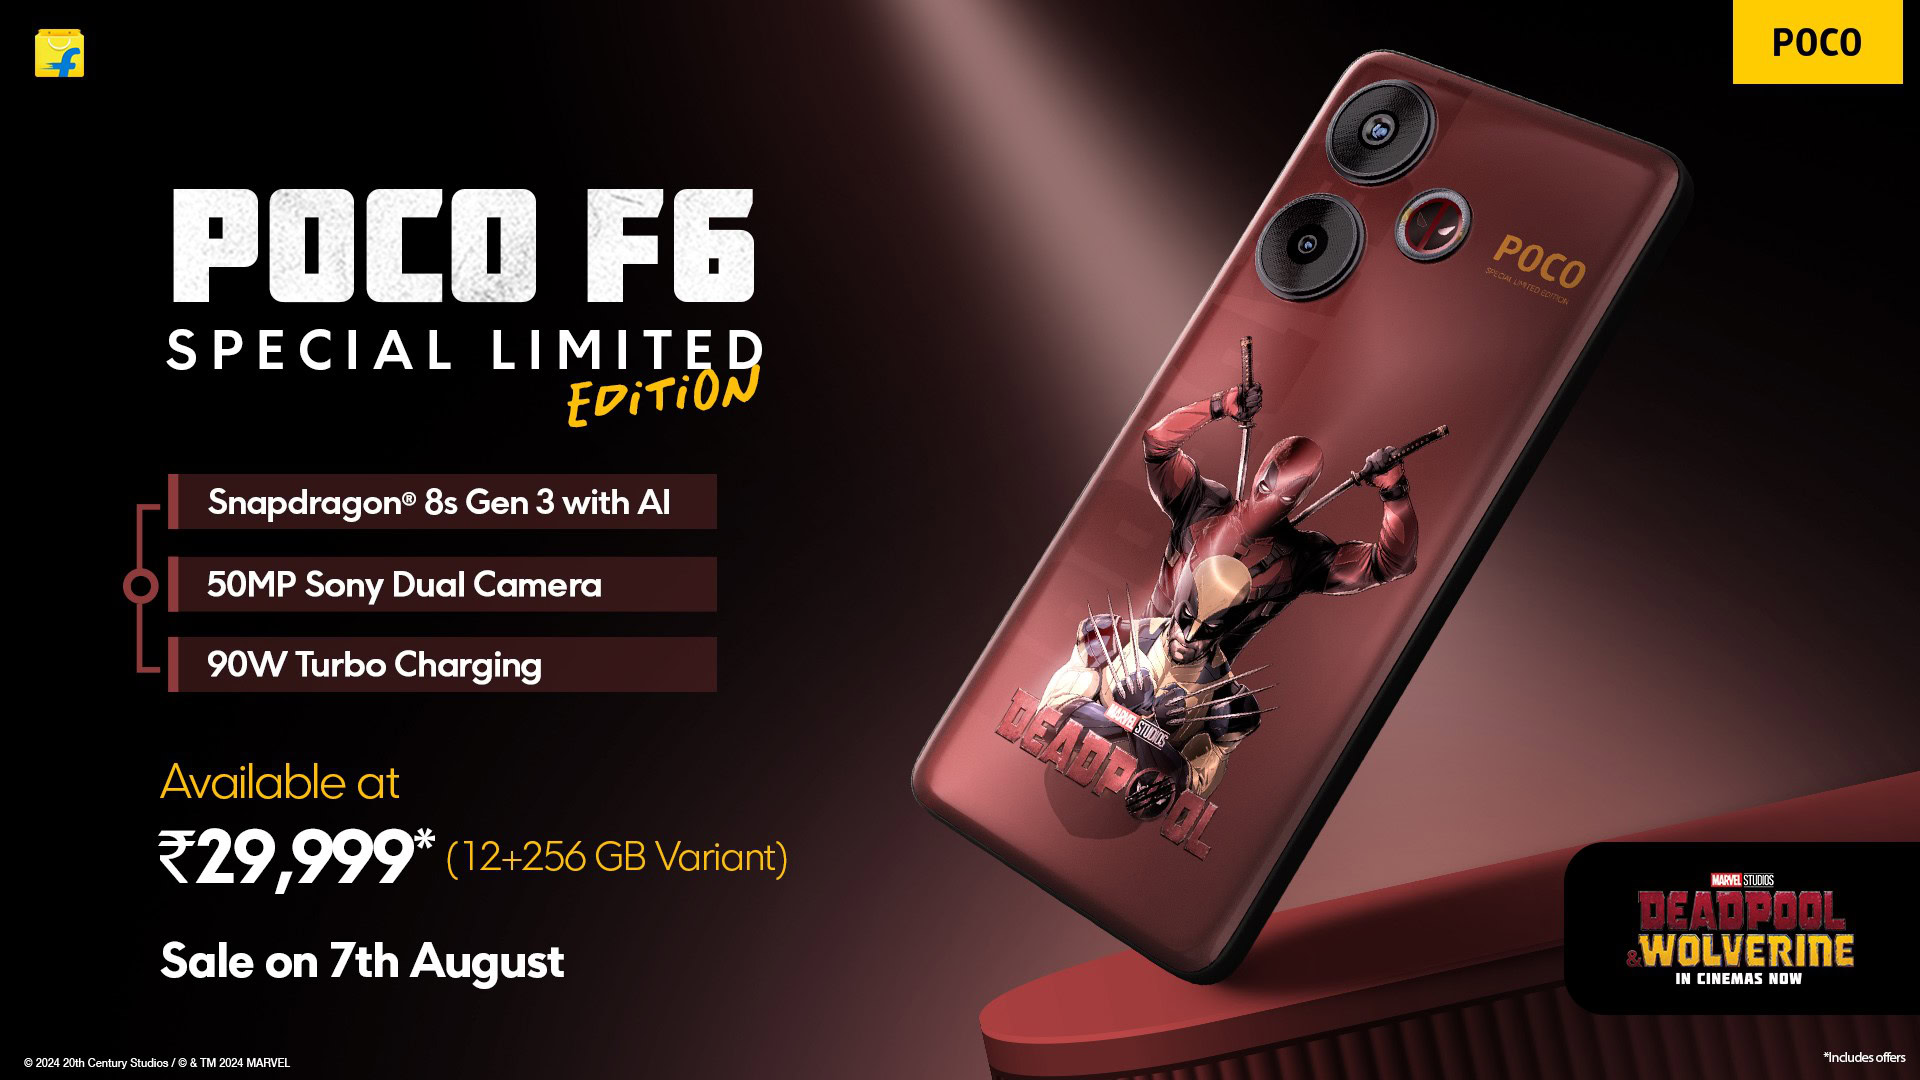 X advertisement for the POCO F6 Deadpool edition